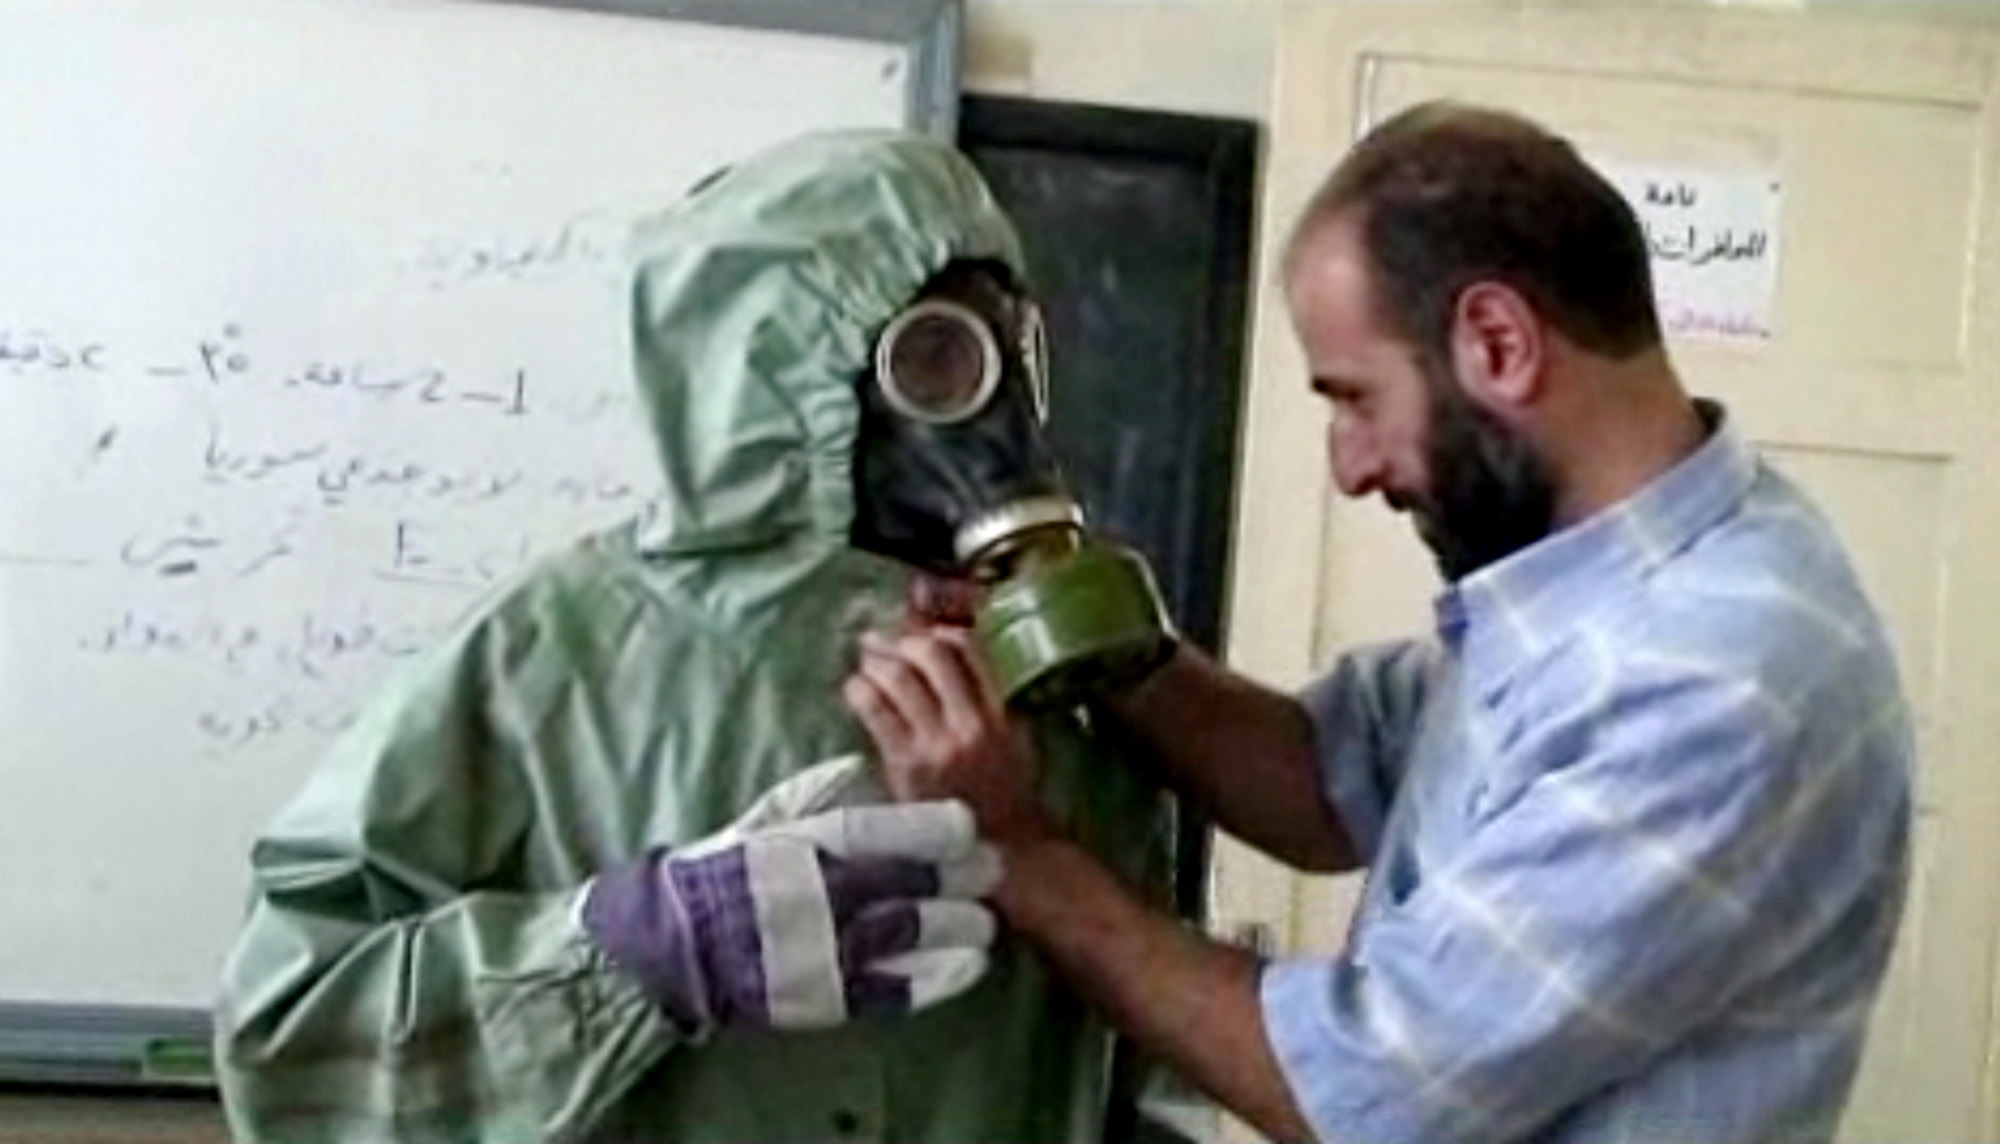 A volunteer adjusts a students gas mask and protective suit during a session on reacting to a chemical weapons attack, in Aleppo, Syria. The Islamic State group is aggressively pursuing development of chemical weapons, setting up a branch dedicated to research and experiments with the help of scientists from Iraq, Syria and elsewhere in the region, according to Iraqi and U.S. intelligence officials.